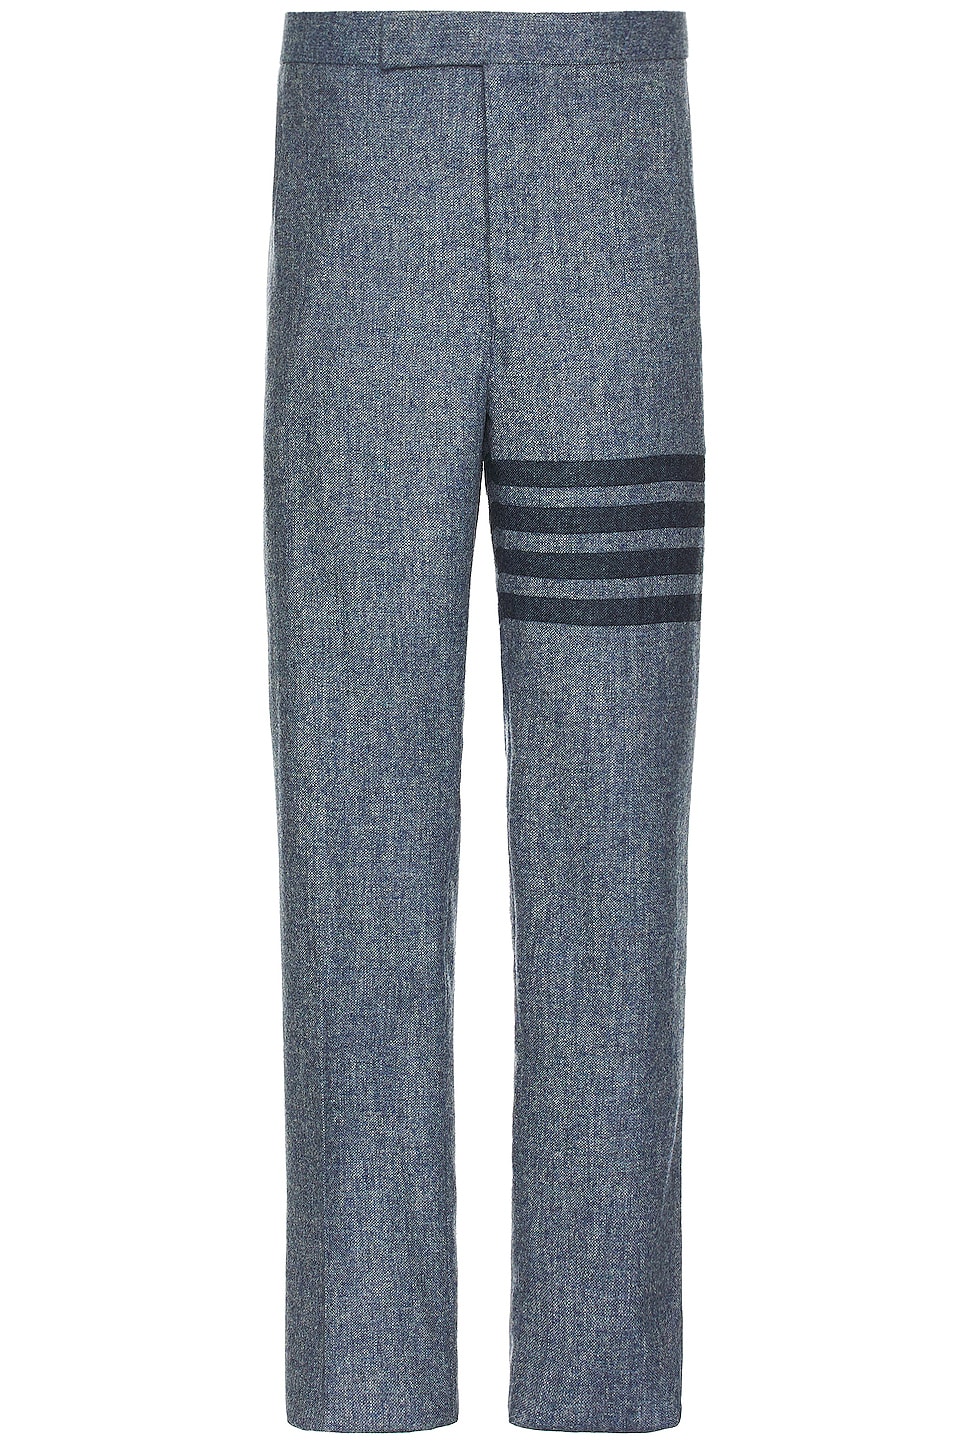 Image 1 of Thom Browne 4 Bar Low Rise Drop Crotch Backstrap Trouser in Light Blue